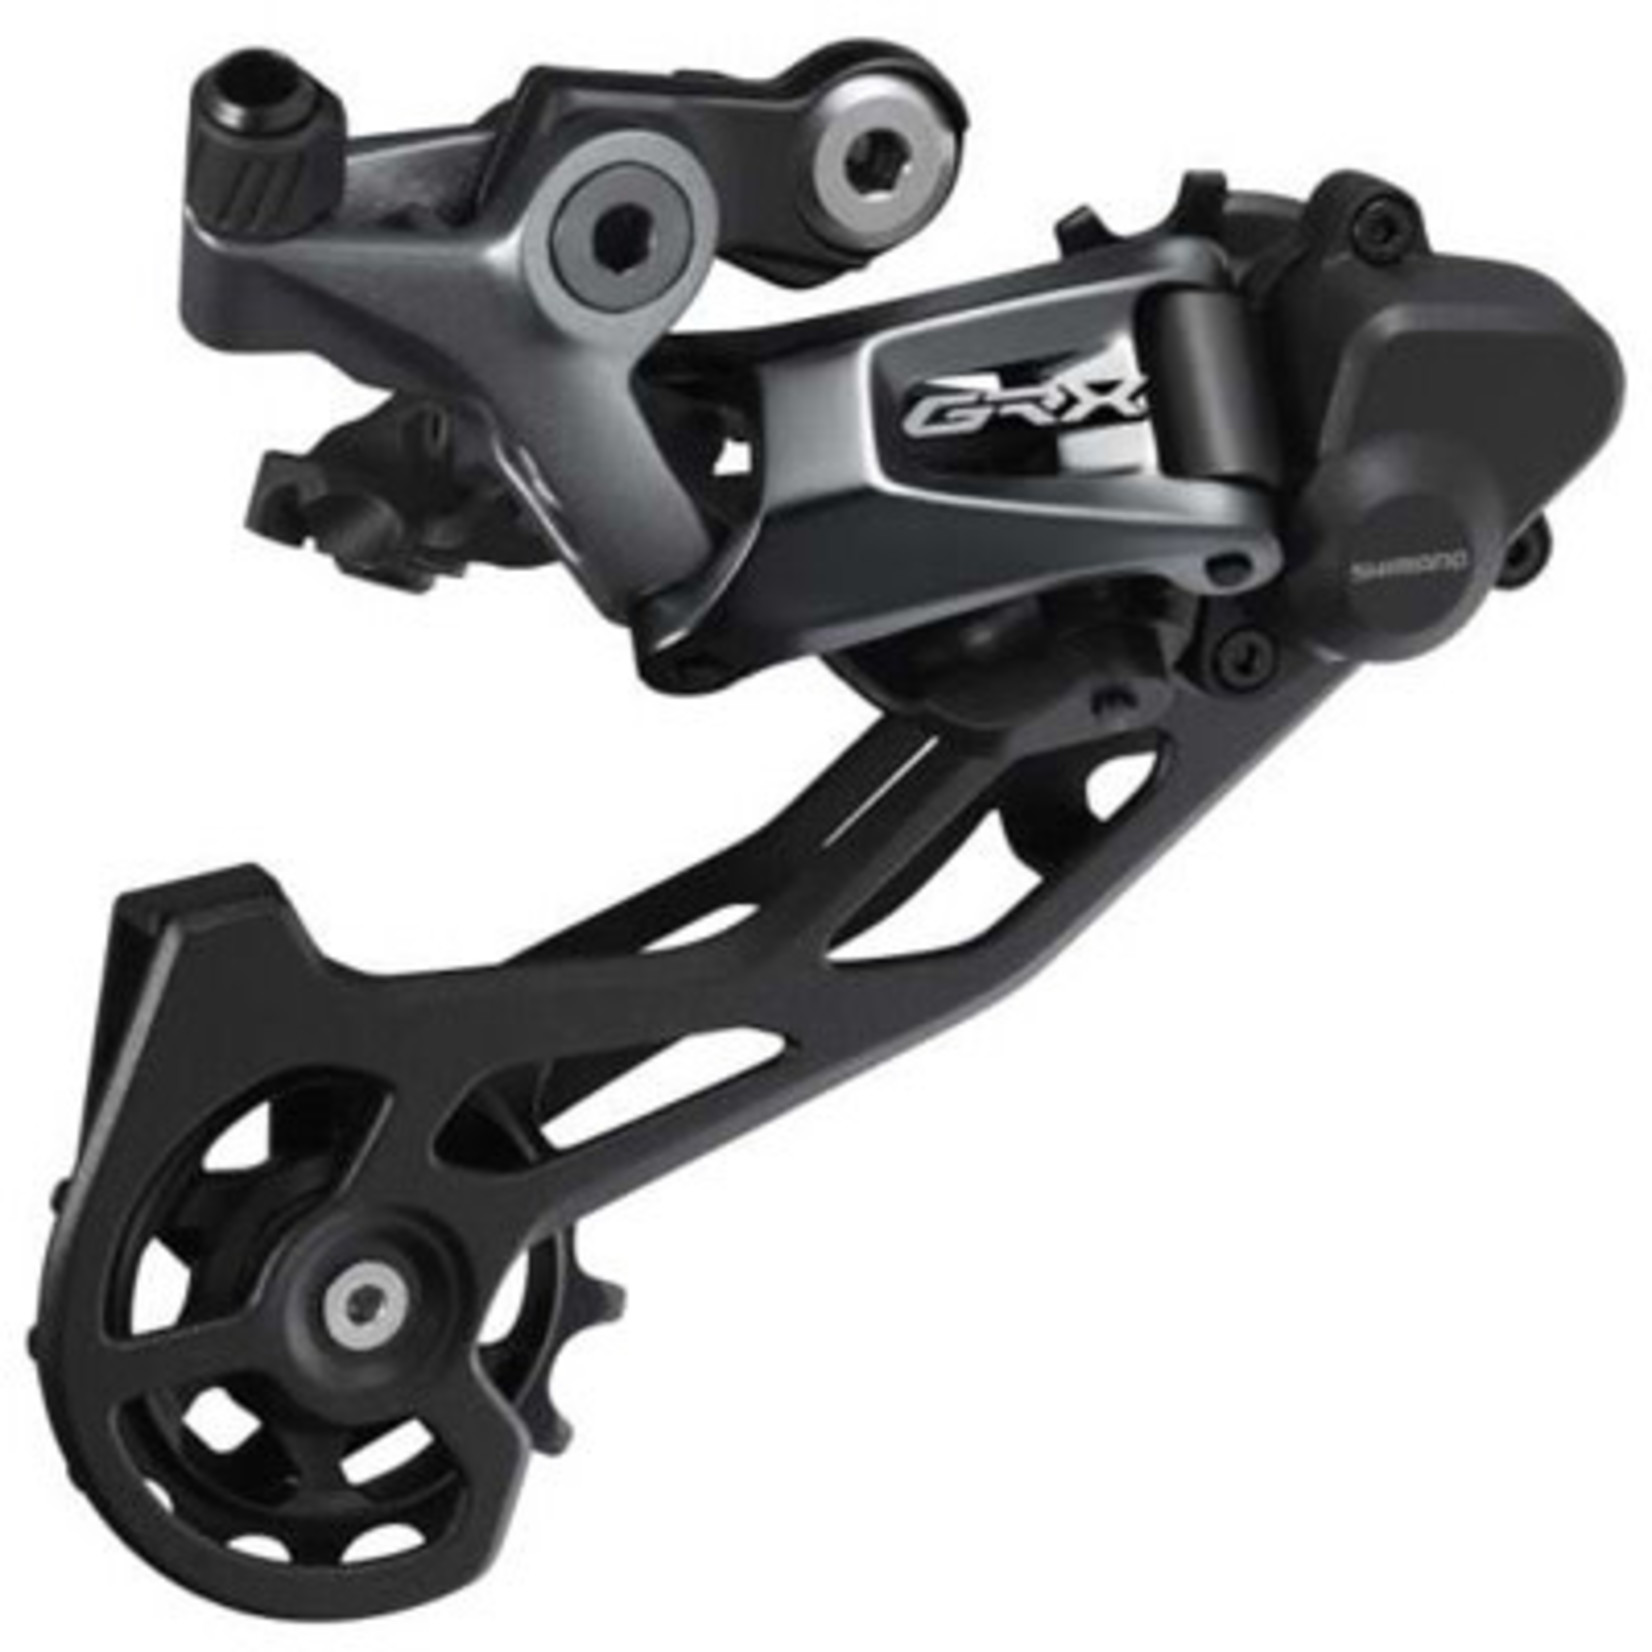 Shimano Shimano GRX RD-RX810 Rear Derailleur - 11-Speed, Long Cage, Black, With Clutch, For 1x and 2x